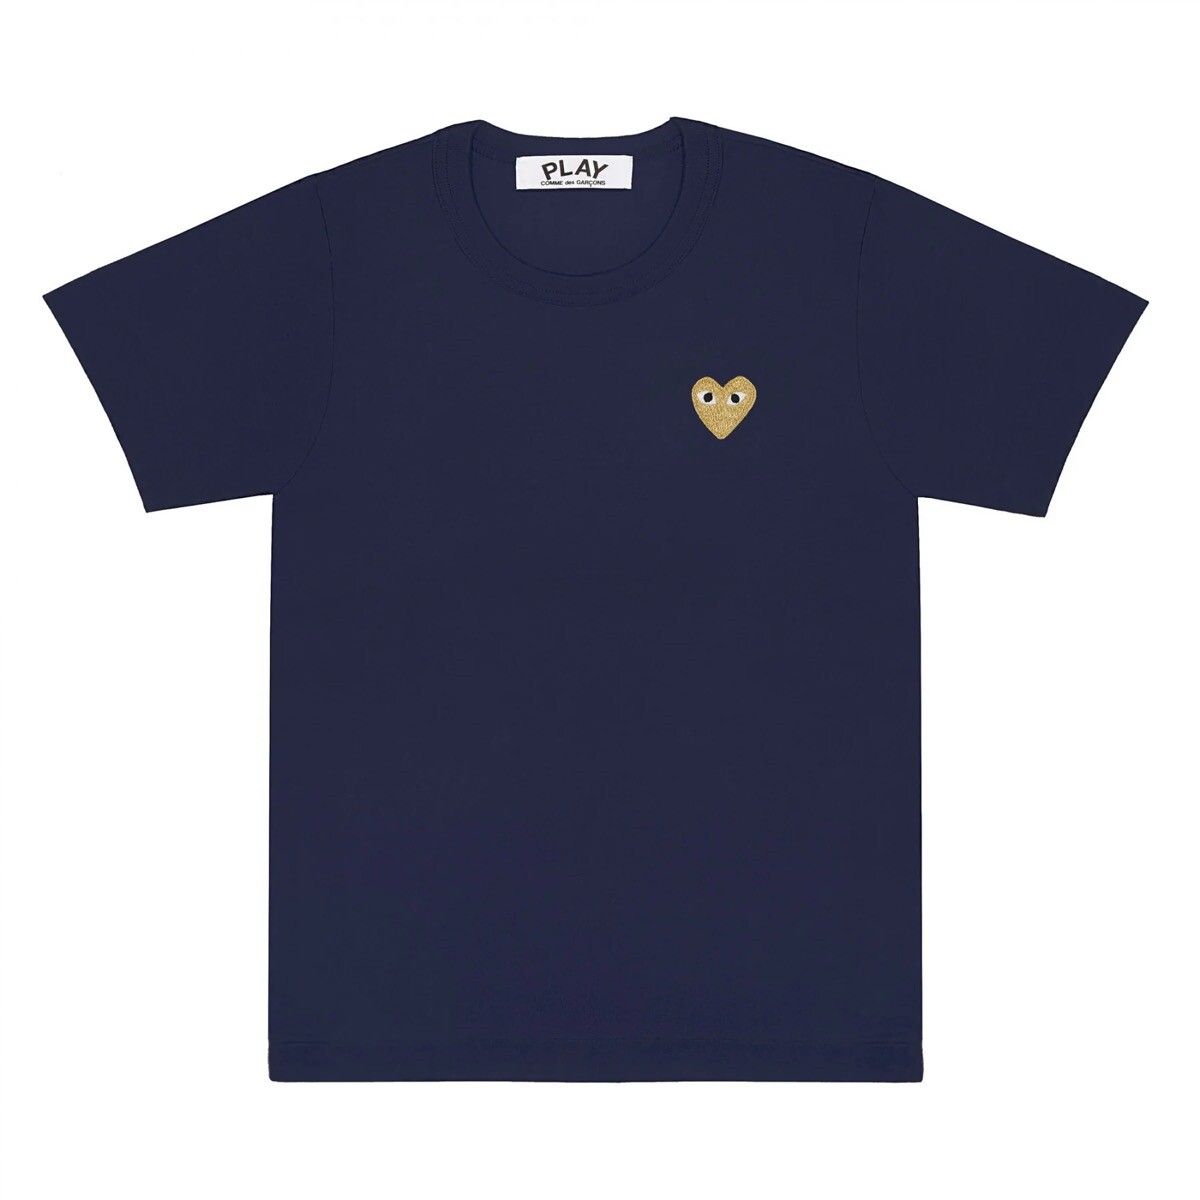 Comme Des Garcons Play CDG Play Short Sleeve Navy T-Shirt Gold logo Size US XL / EU 56 / 4 - 1 Preview